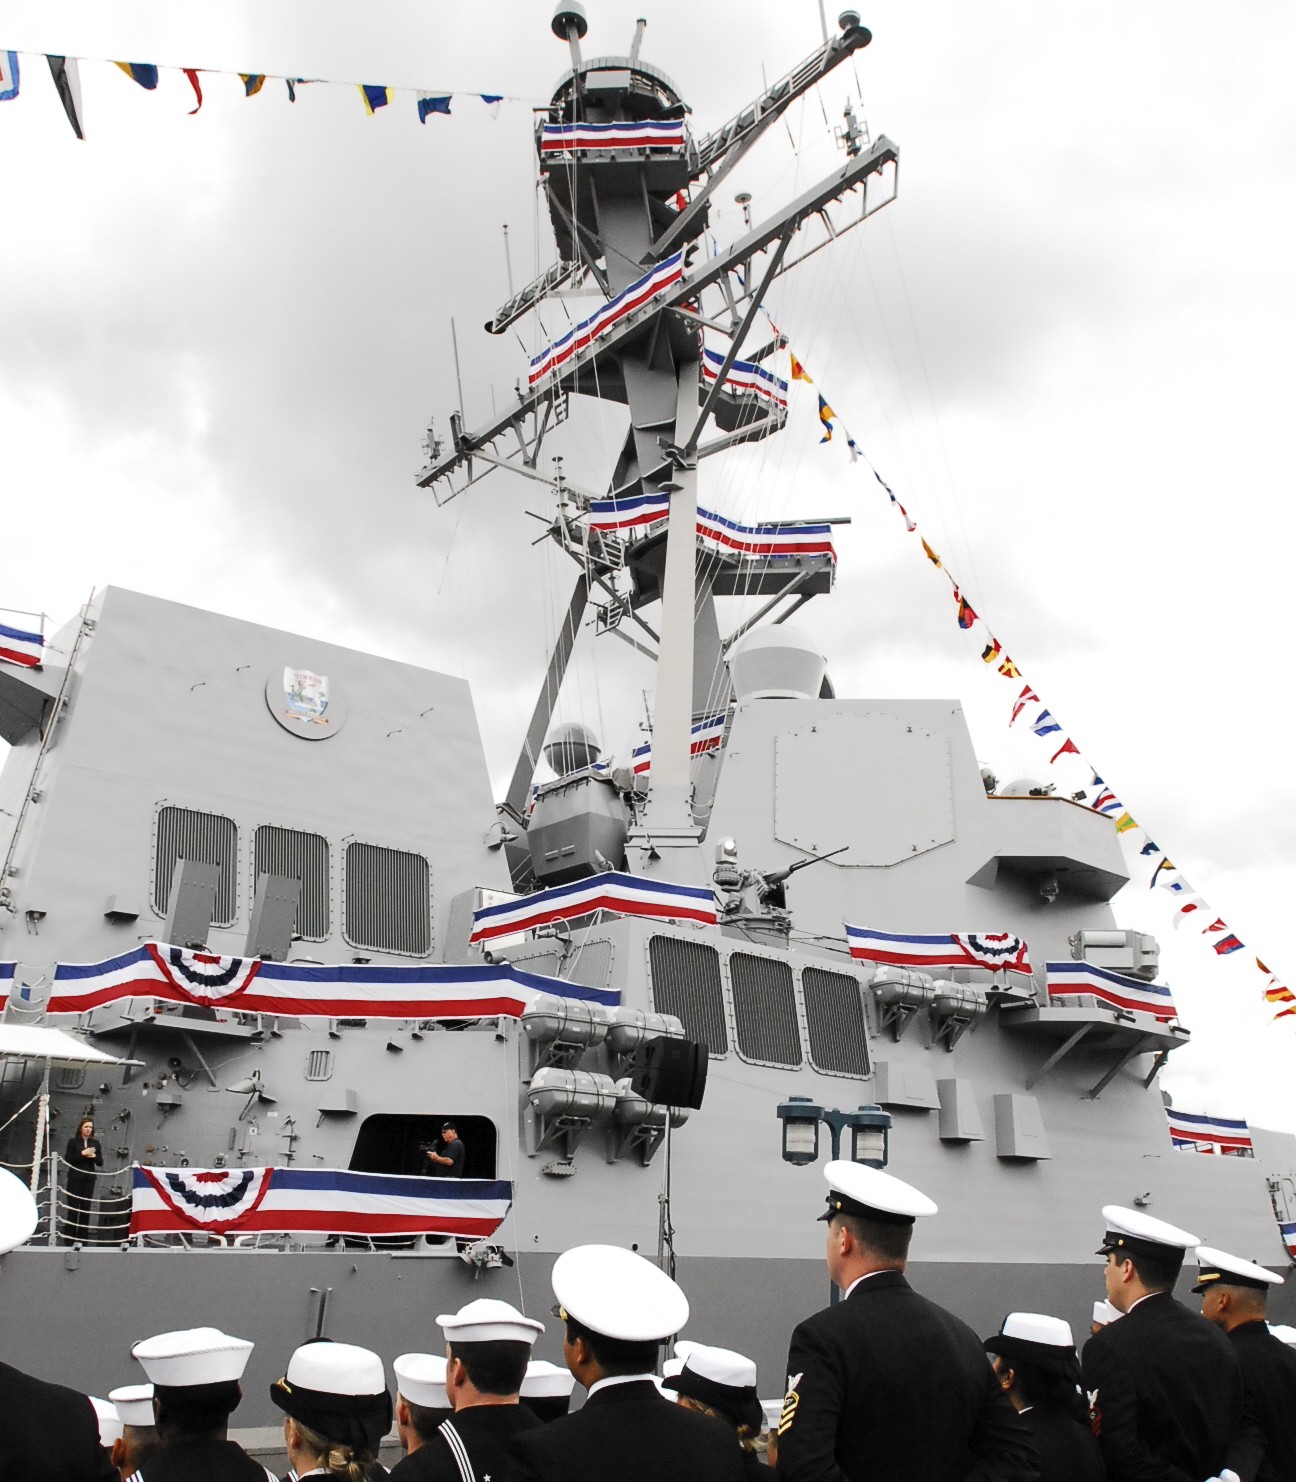 ddg-108 uss wayne e. meyer arleigh burke class guided missile destroyer aegis us navy commissioning 2009 04